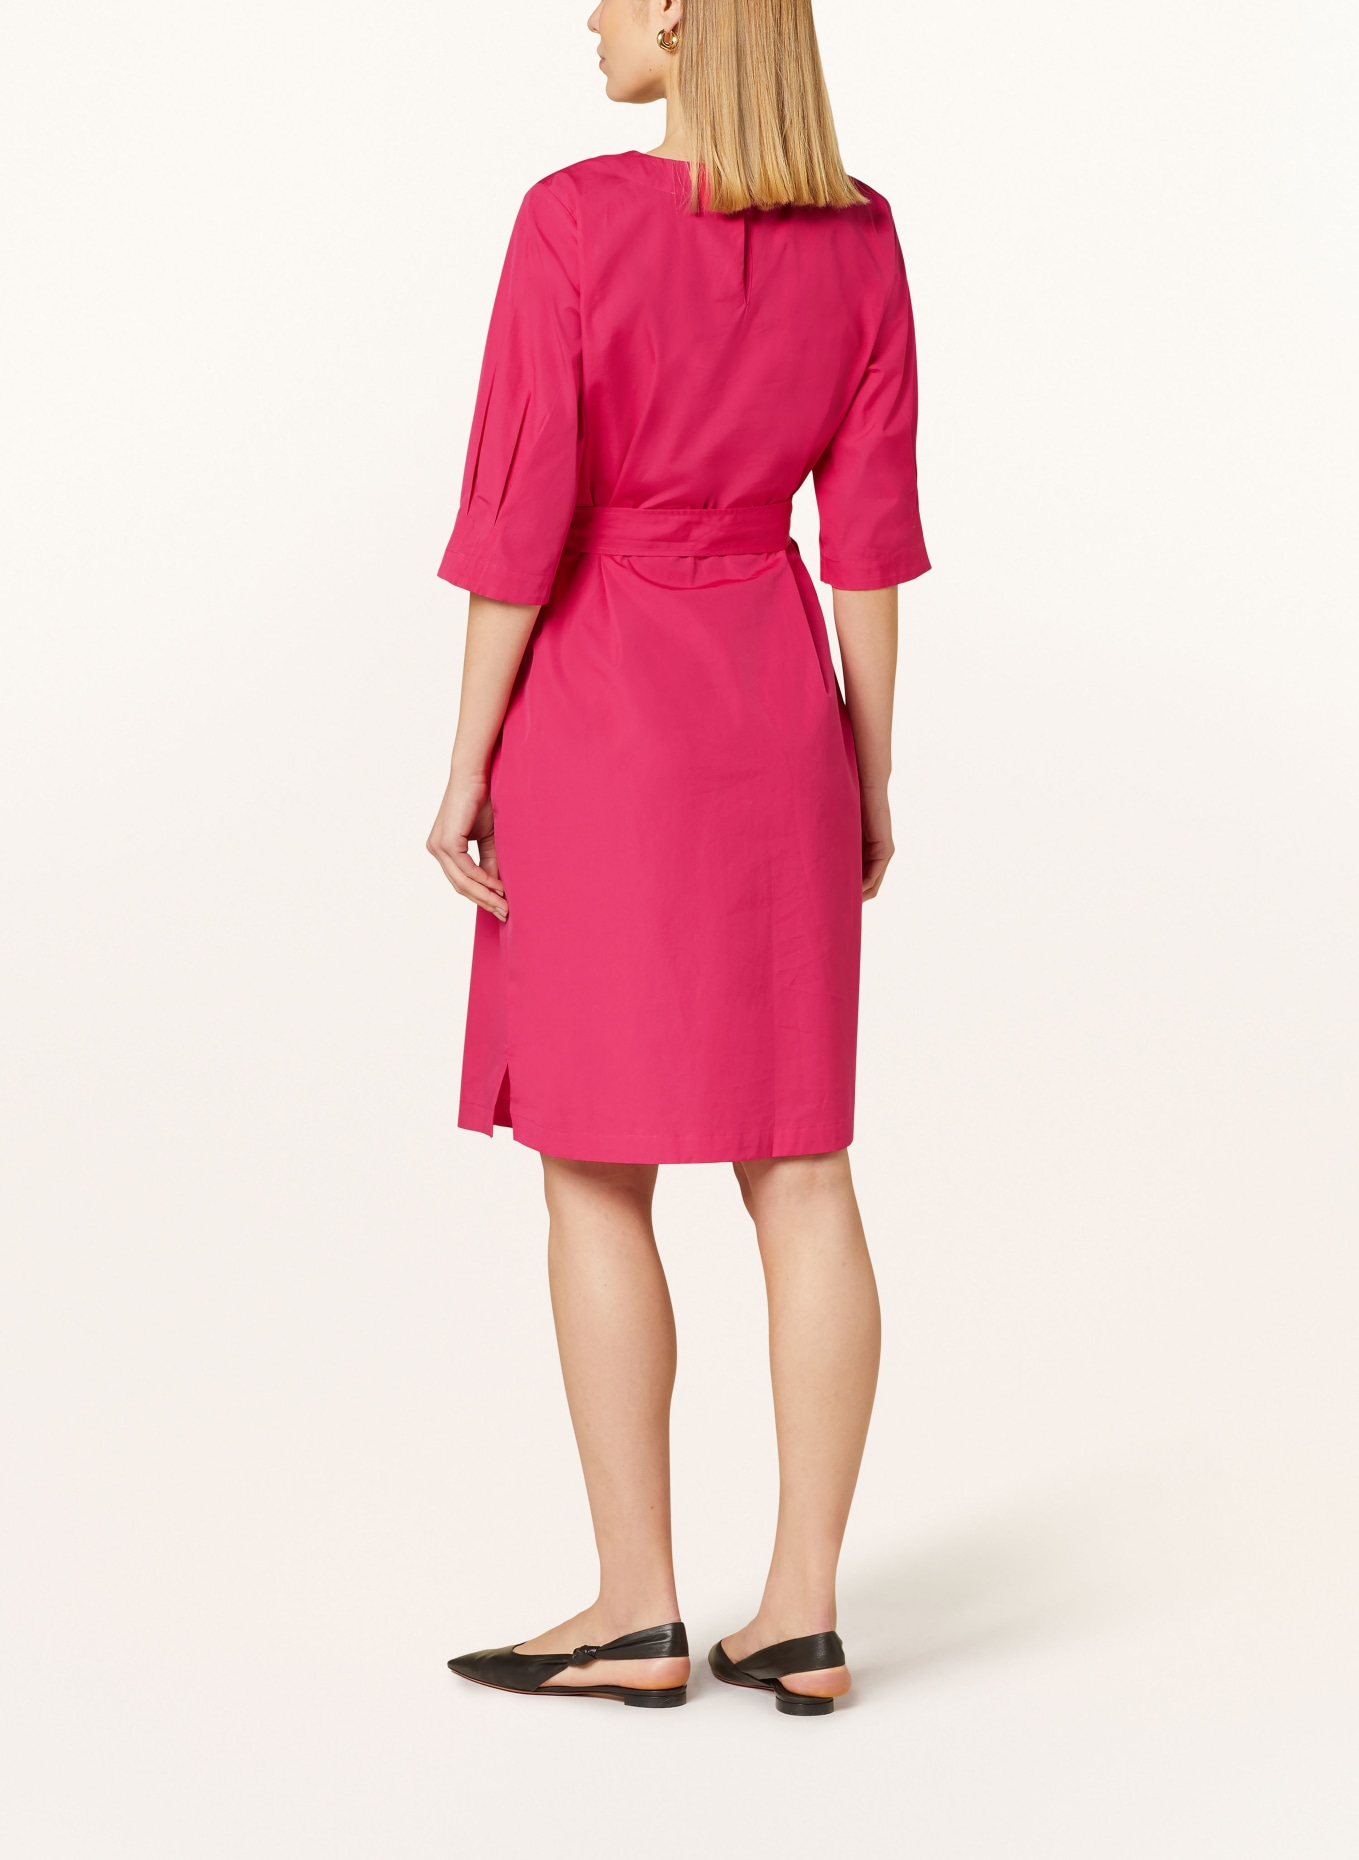 MAERZ MUENCHEN Dress with 3/4 sleeves, Color: PINK (Image 3)